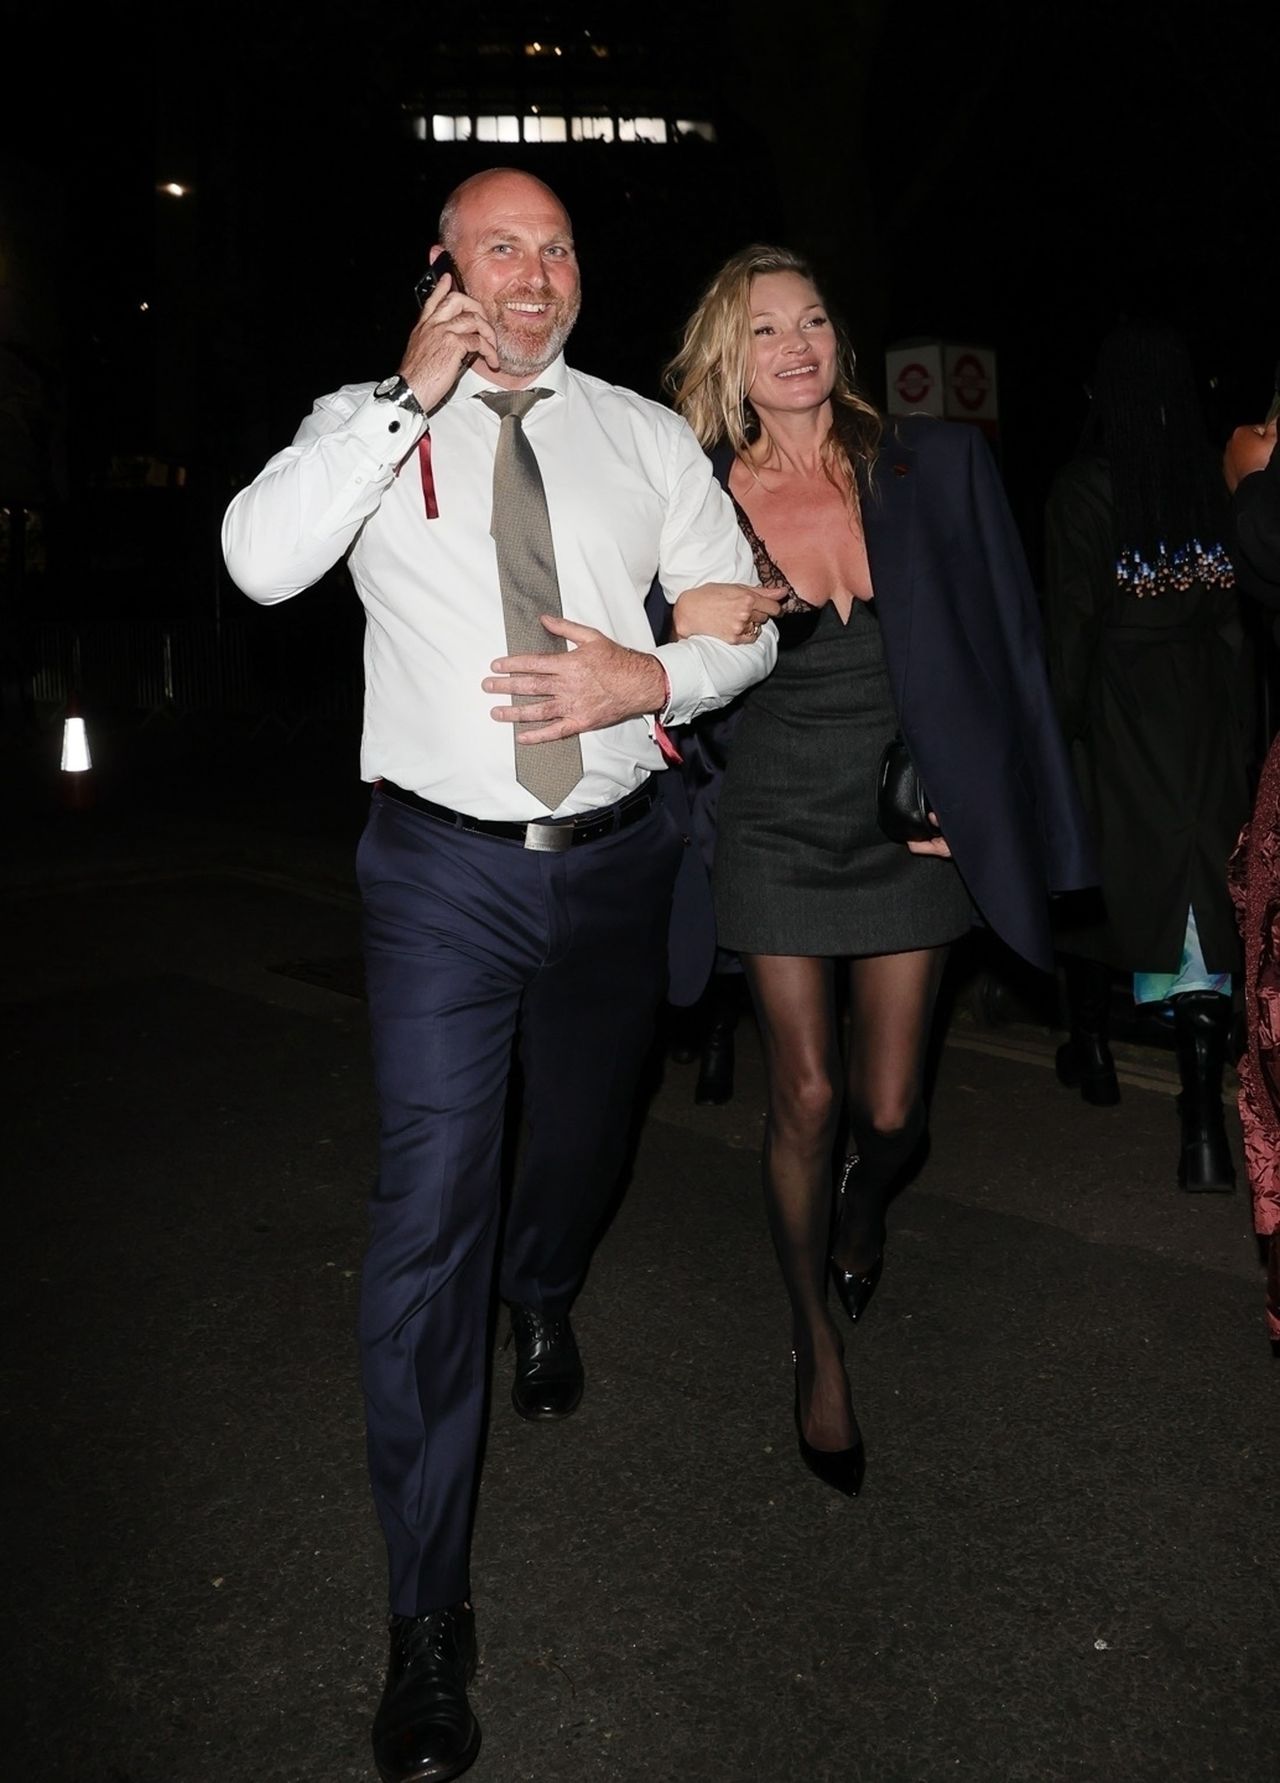 Laughing Kate Moss runs out of the Gucci after party.